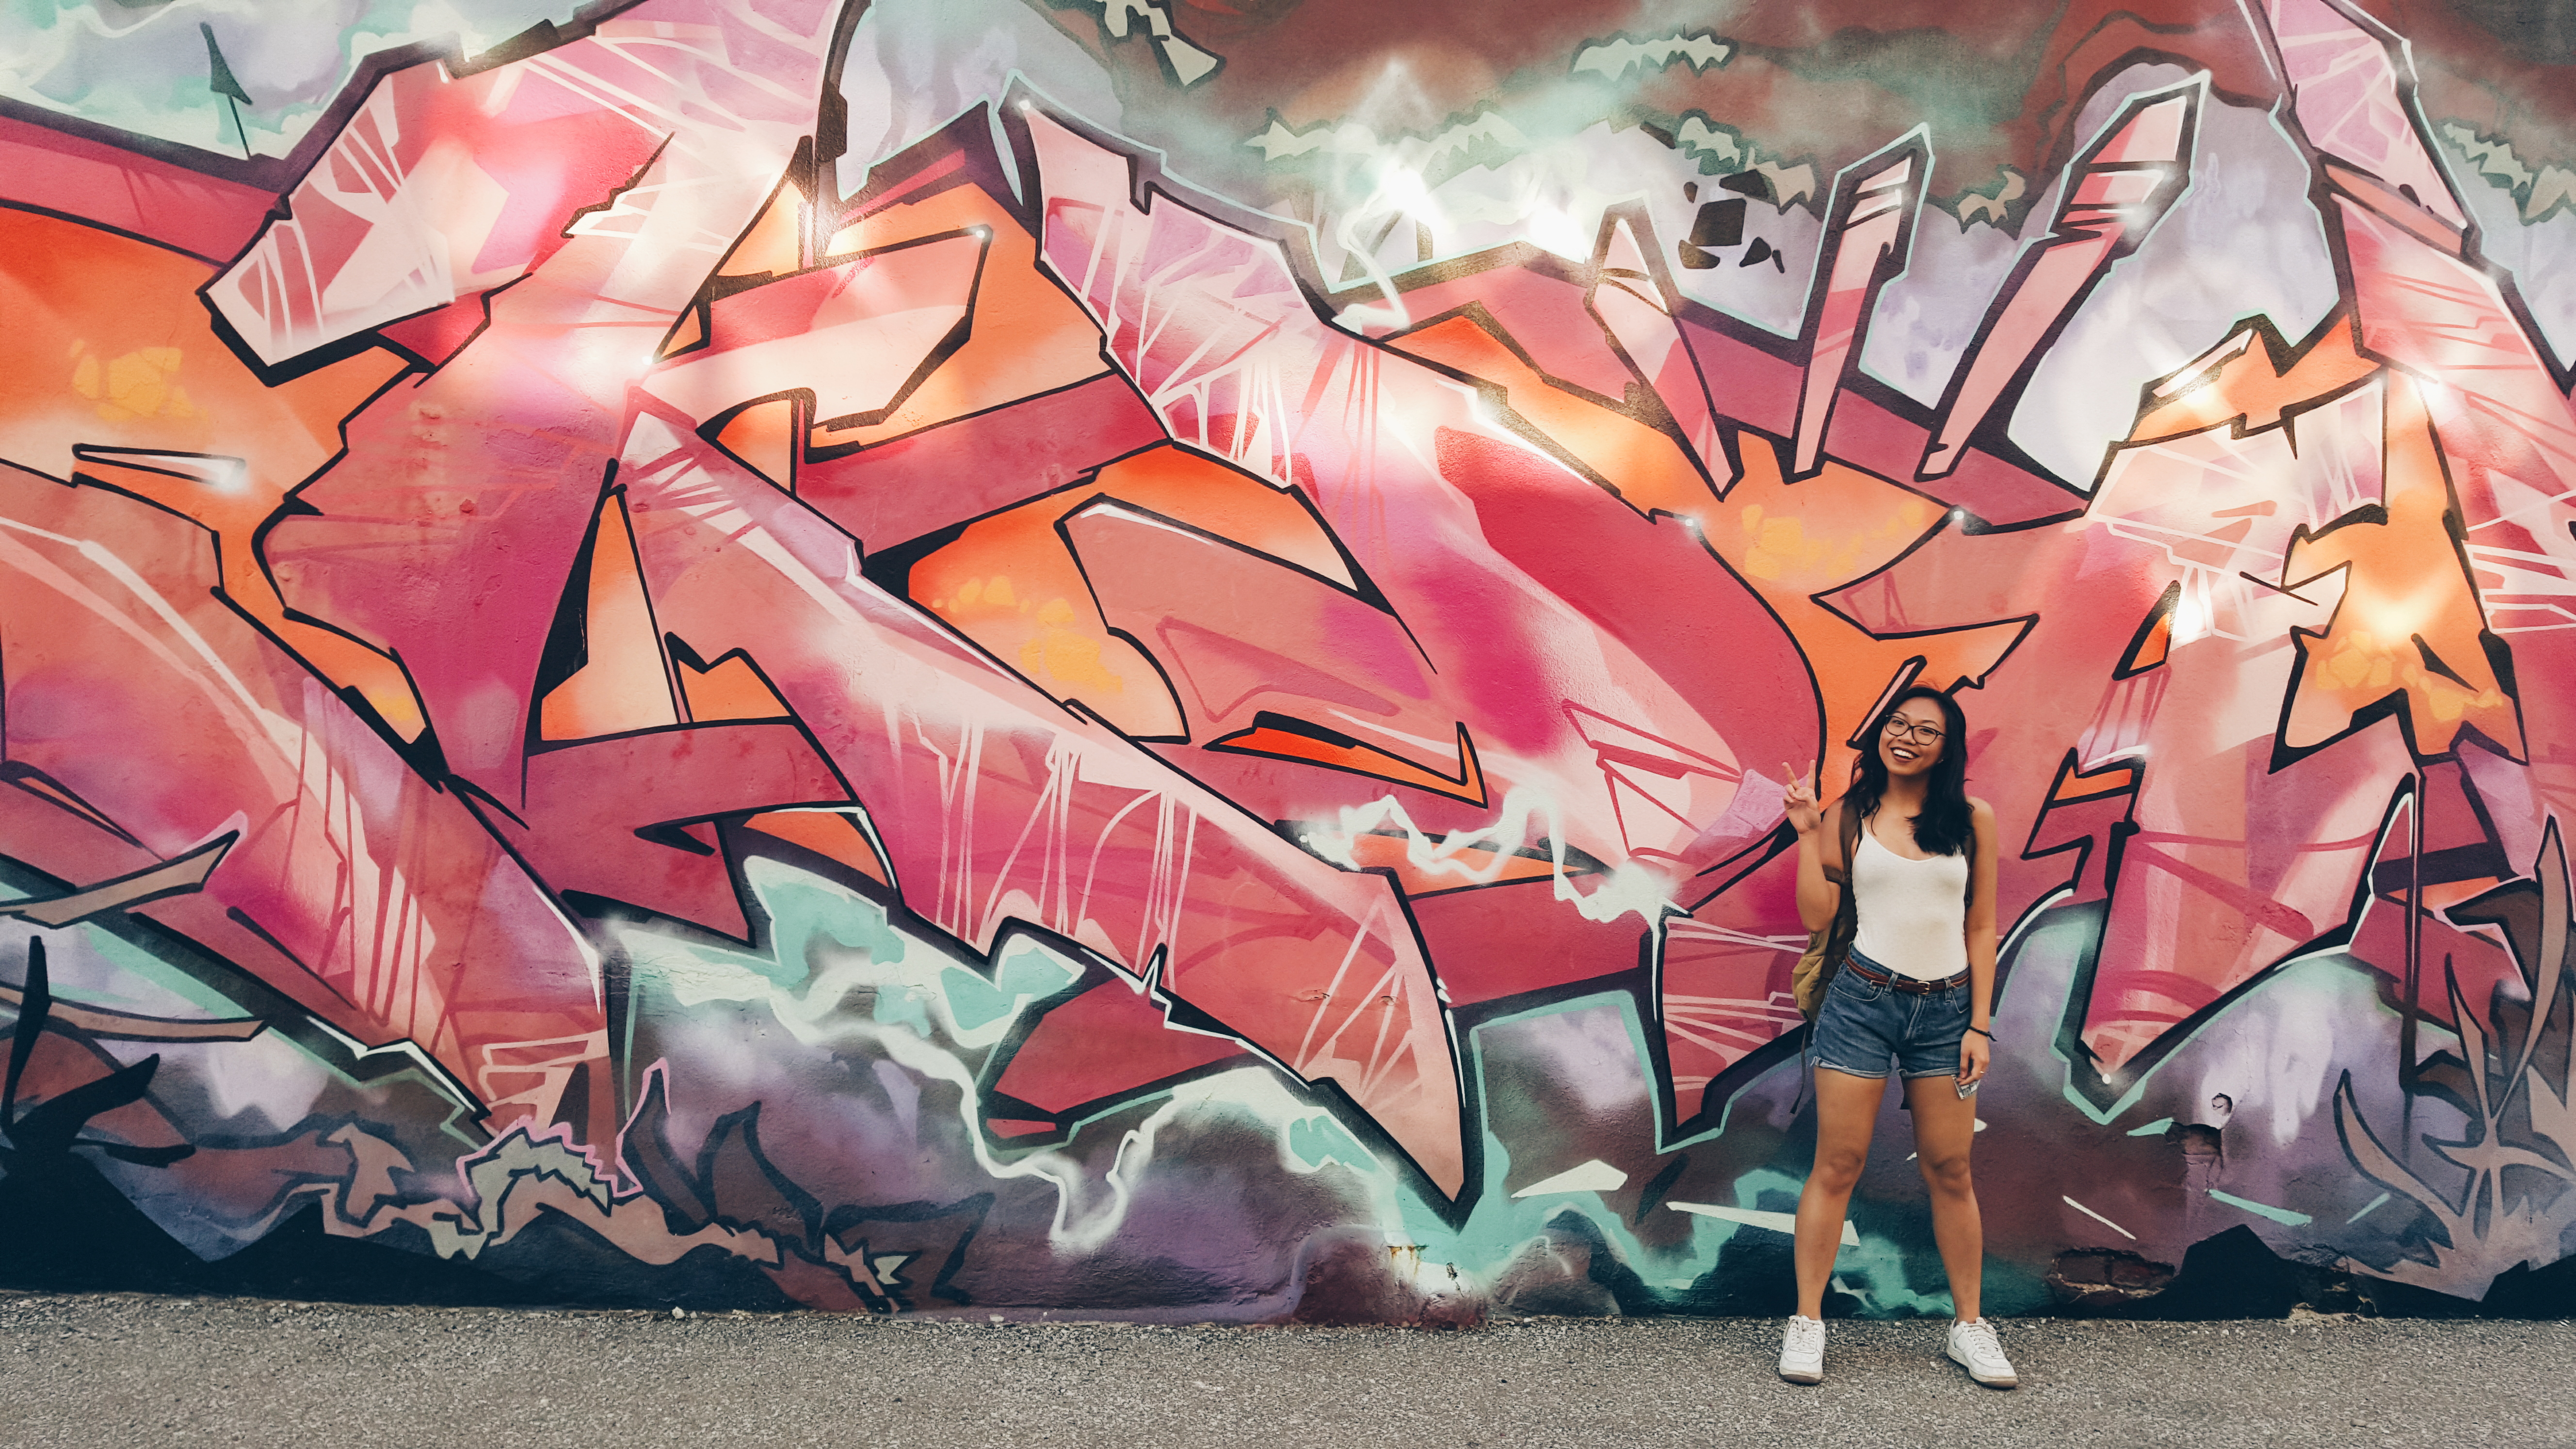 Me standing in front of a graffiti wall. 